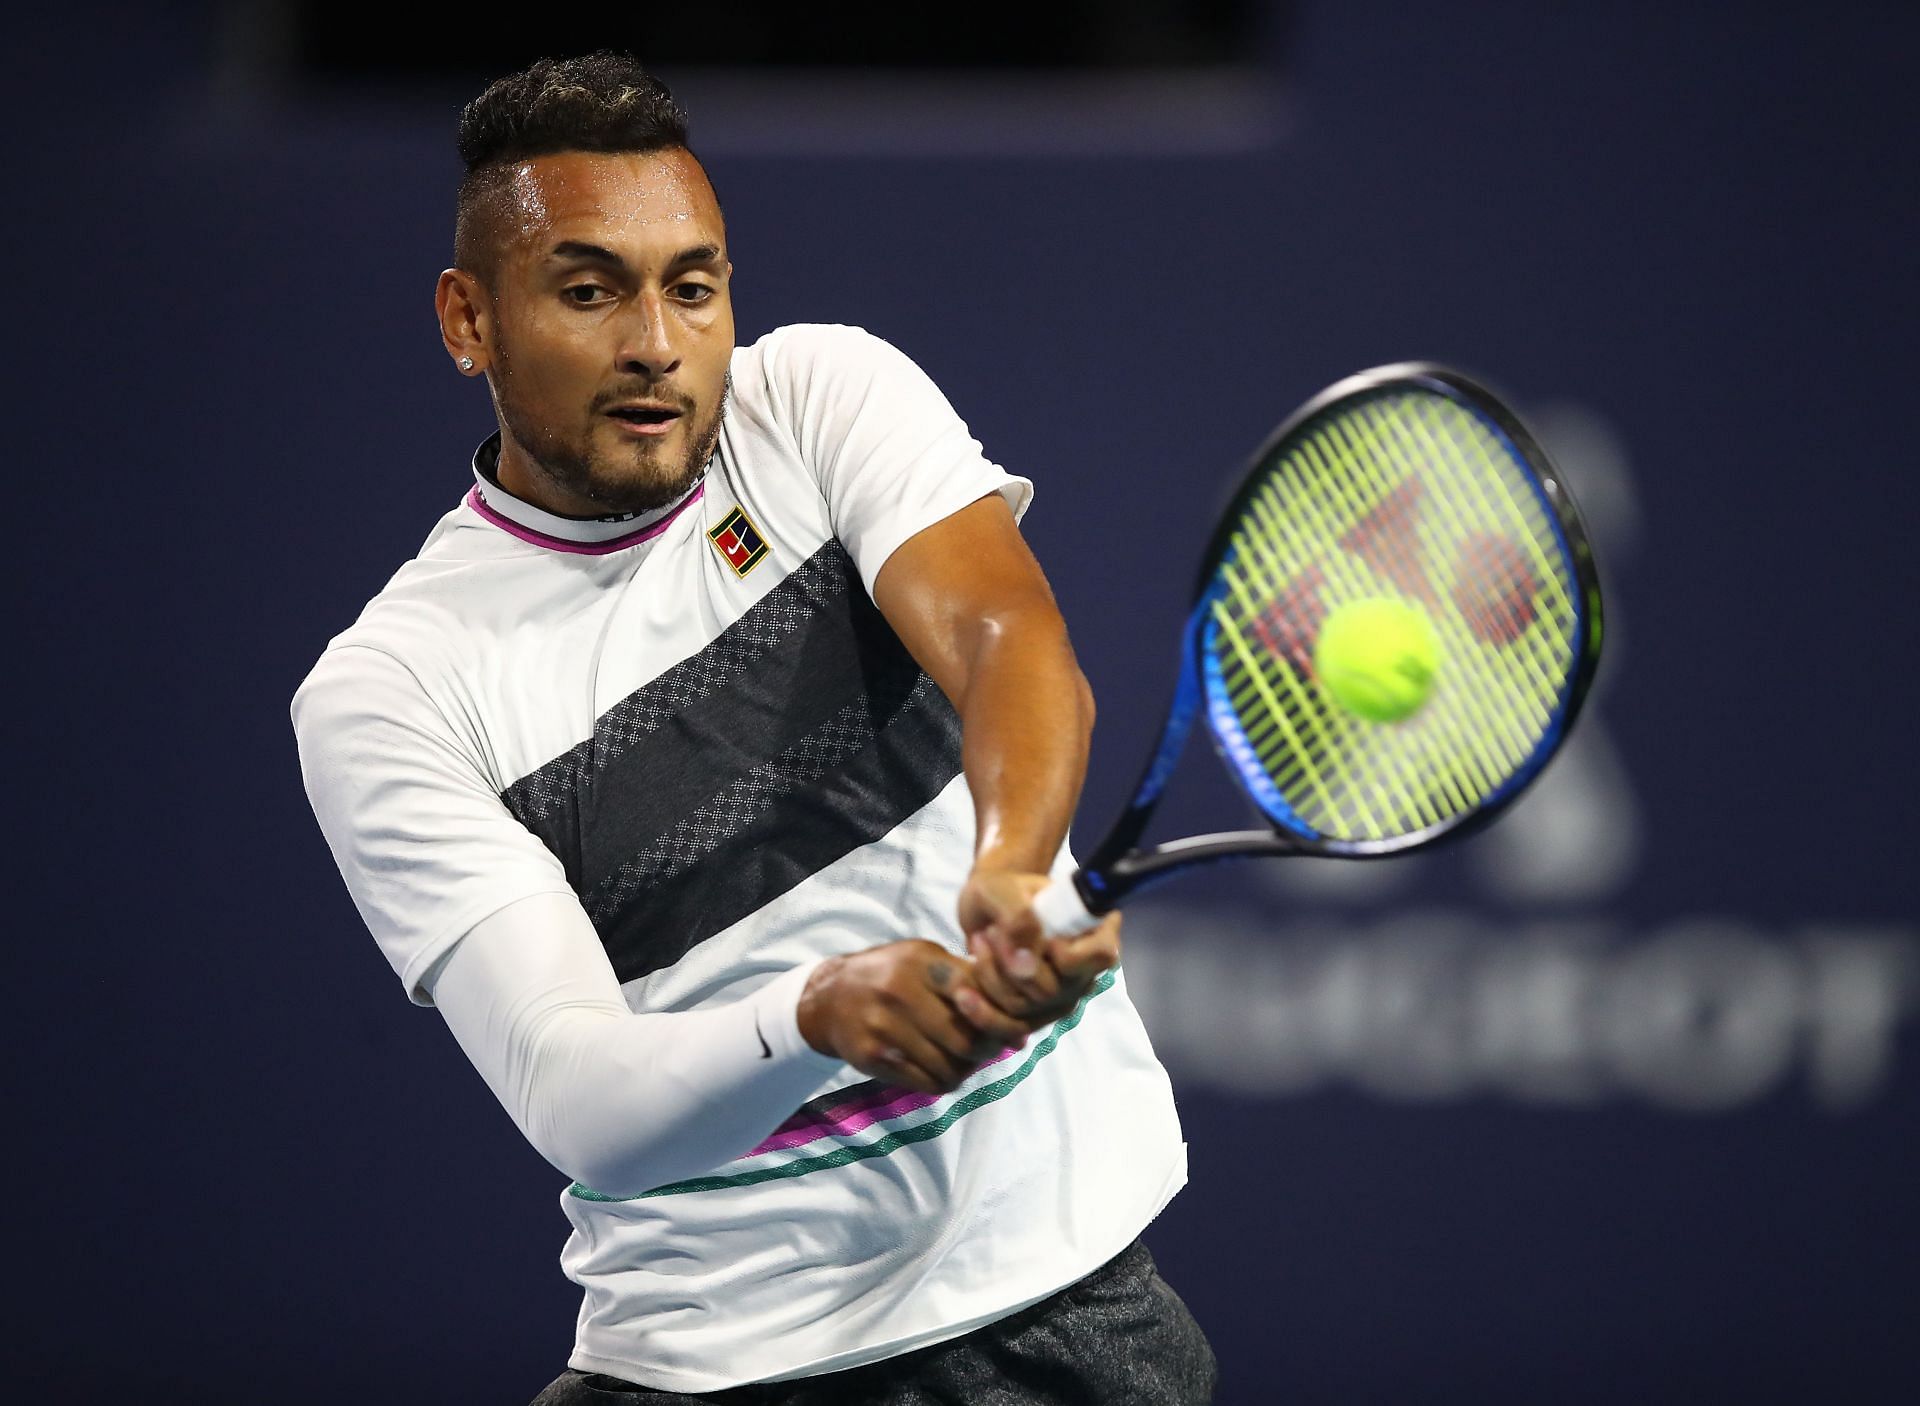 Nick Kyrgios will look to continue his impressive run of form at the Miami Masters